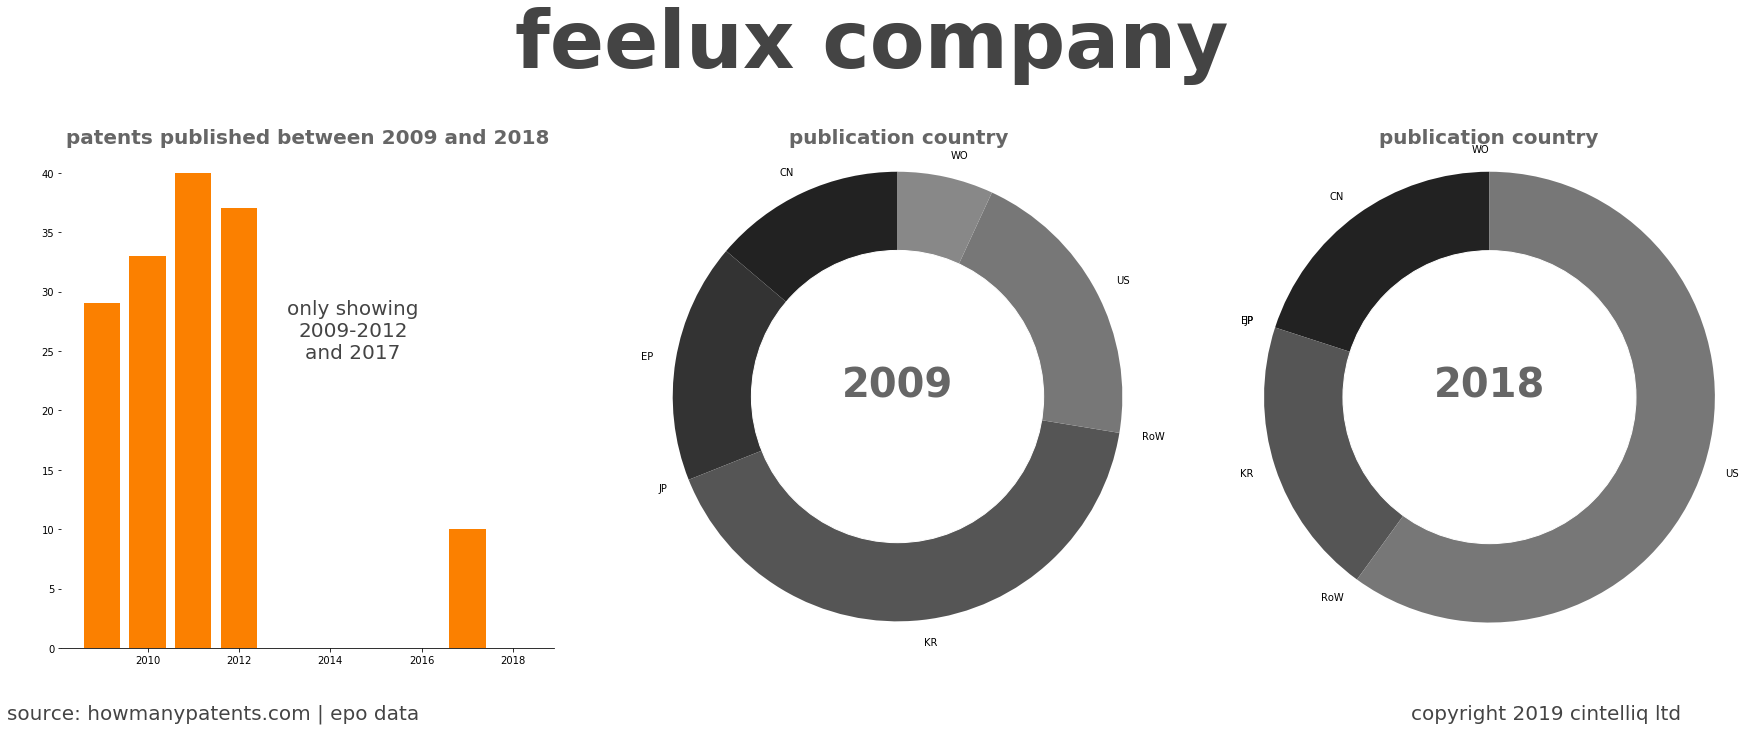 summary of patents for Feelux Company